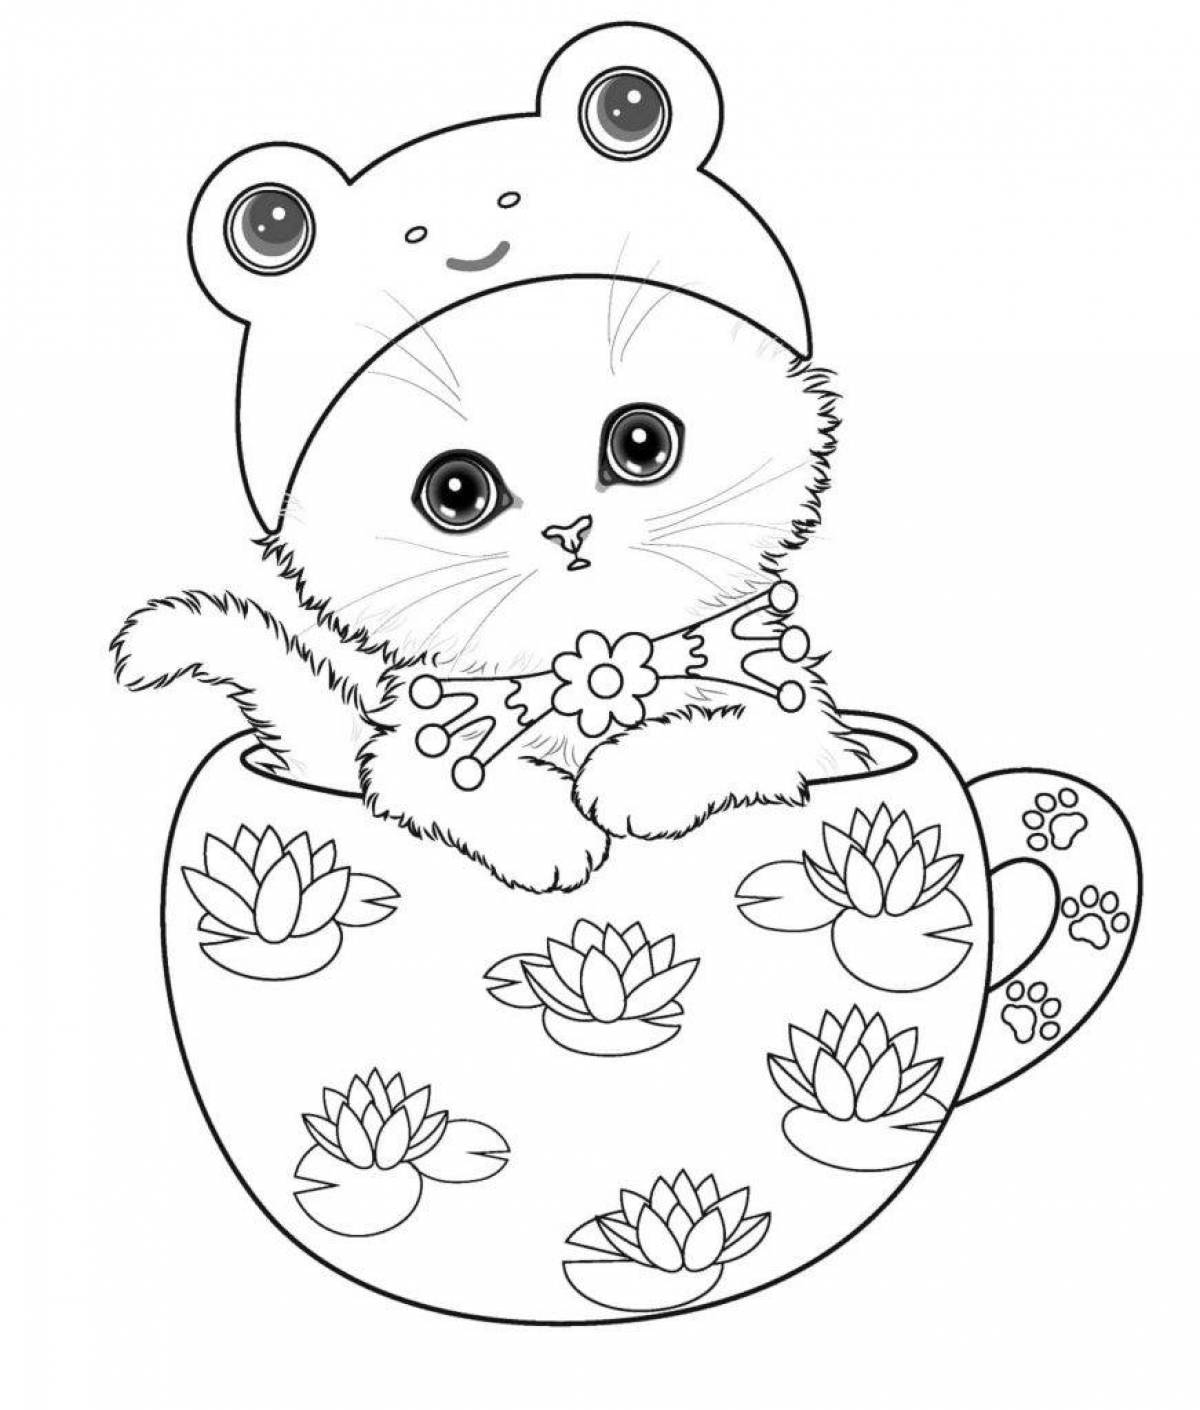 Funny kitty coloring book